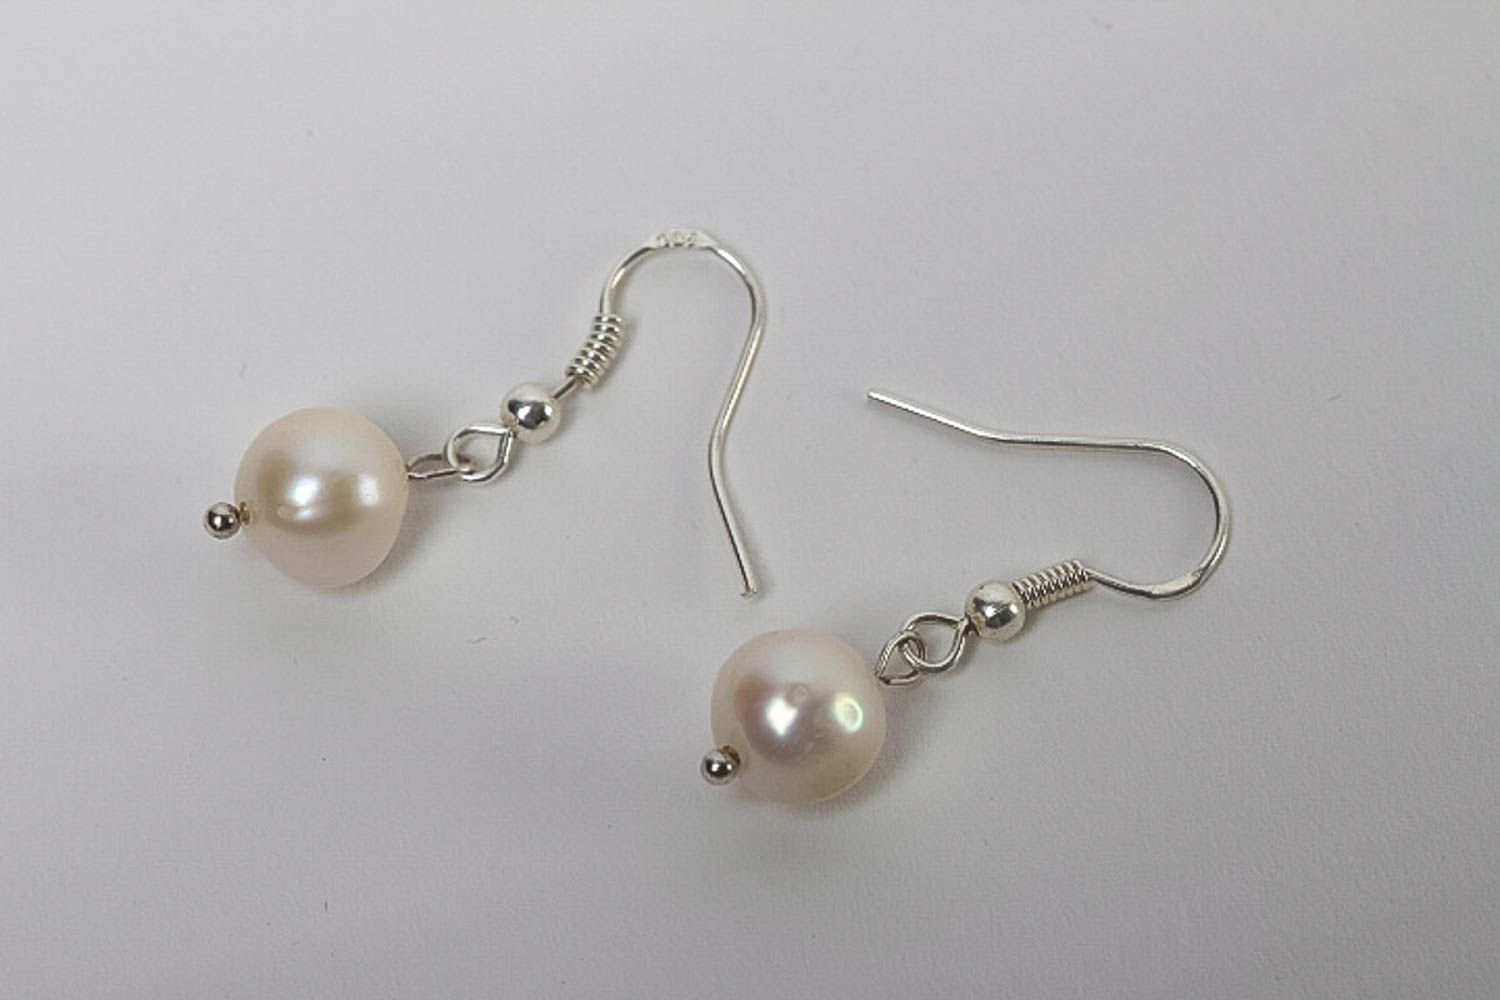 Handmade earrings with pearls earrings with charms designer accessories photo 2